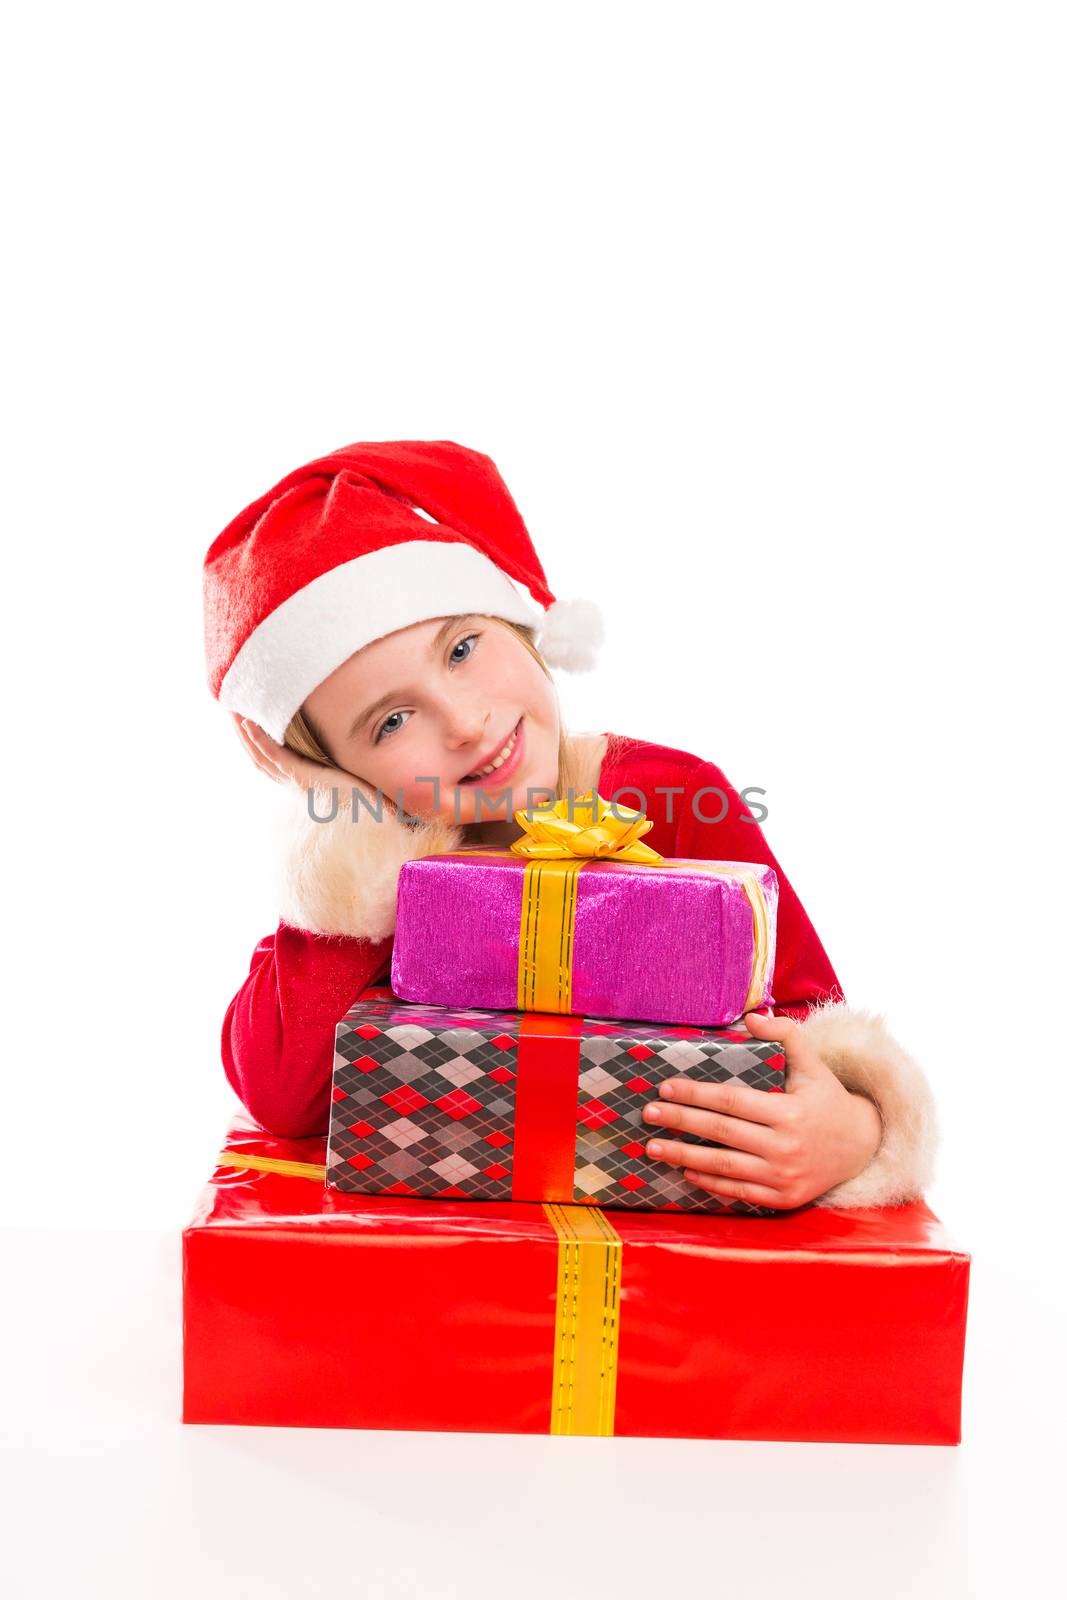 Christmas Santa kid girl happy excited with ribbon gifts isolated on white background